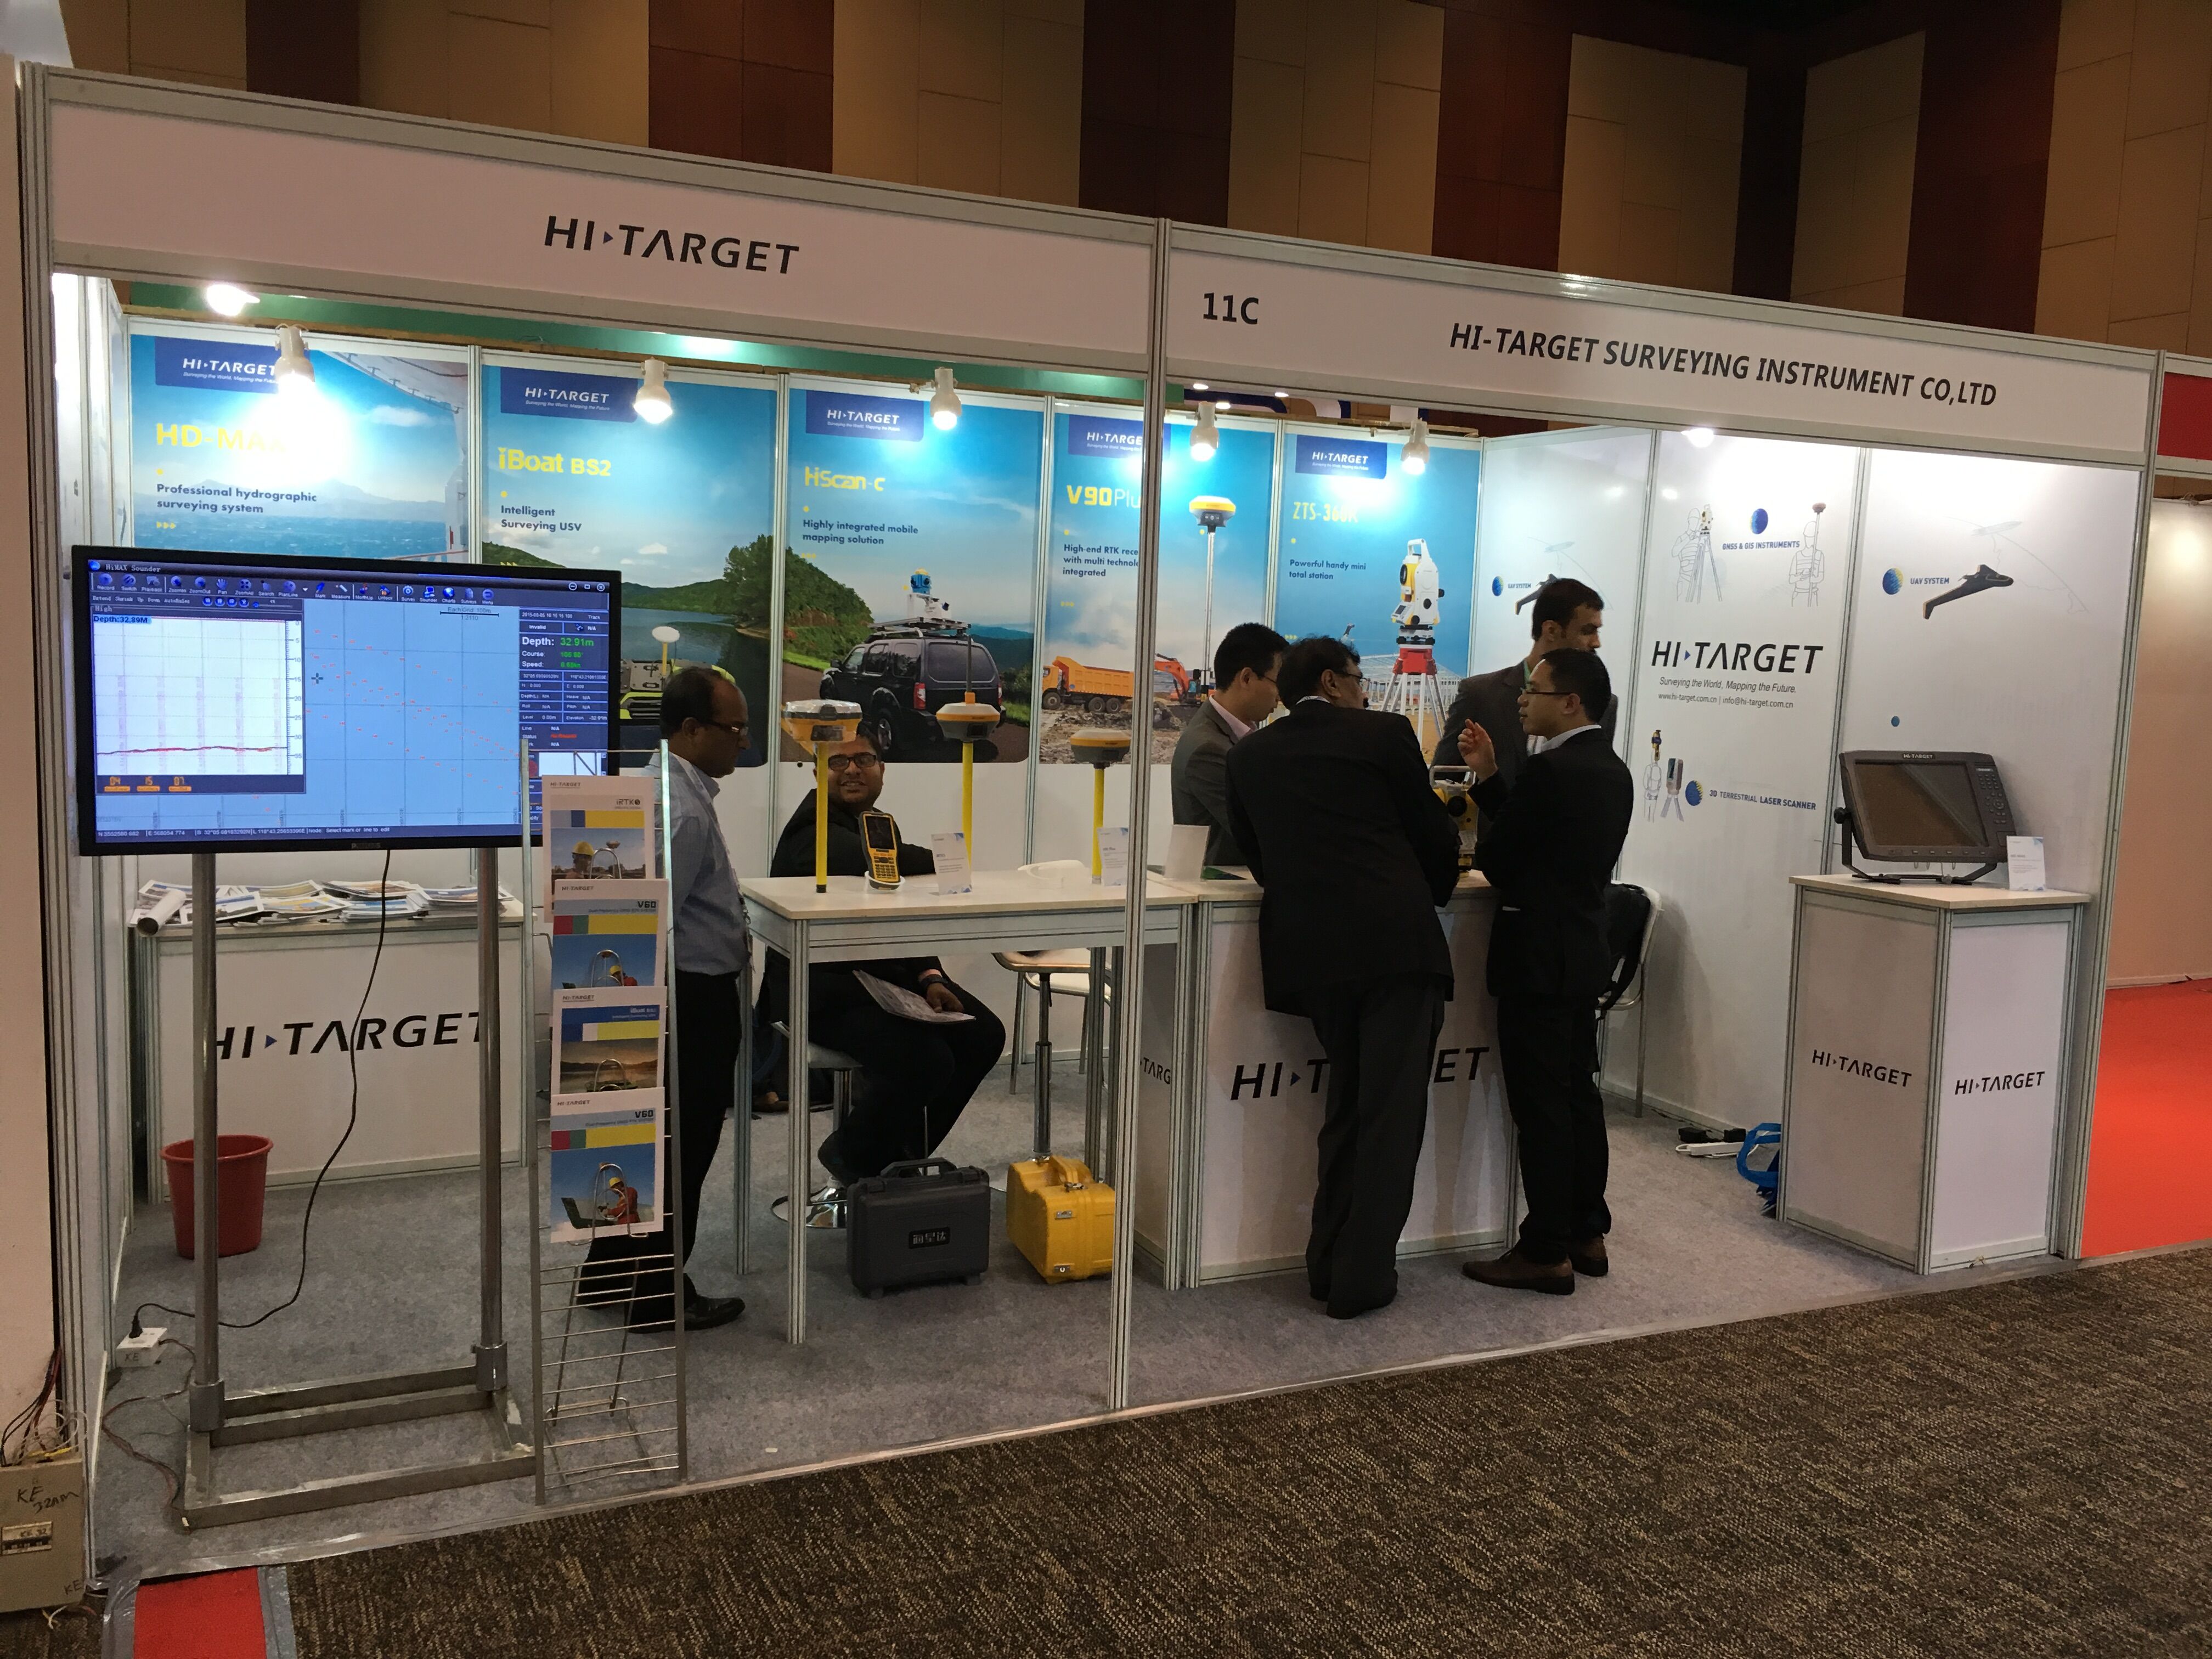 20180125054832078 - Hi-Target displayed its new products at Geospatial World Forum 2018